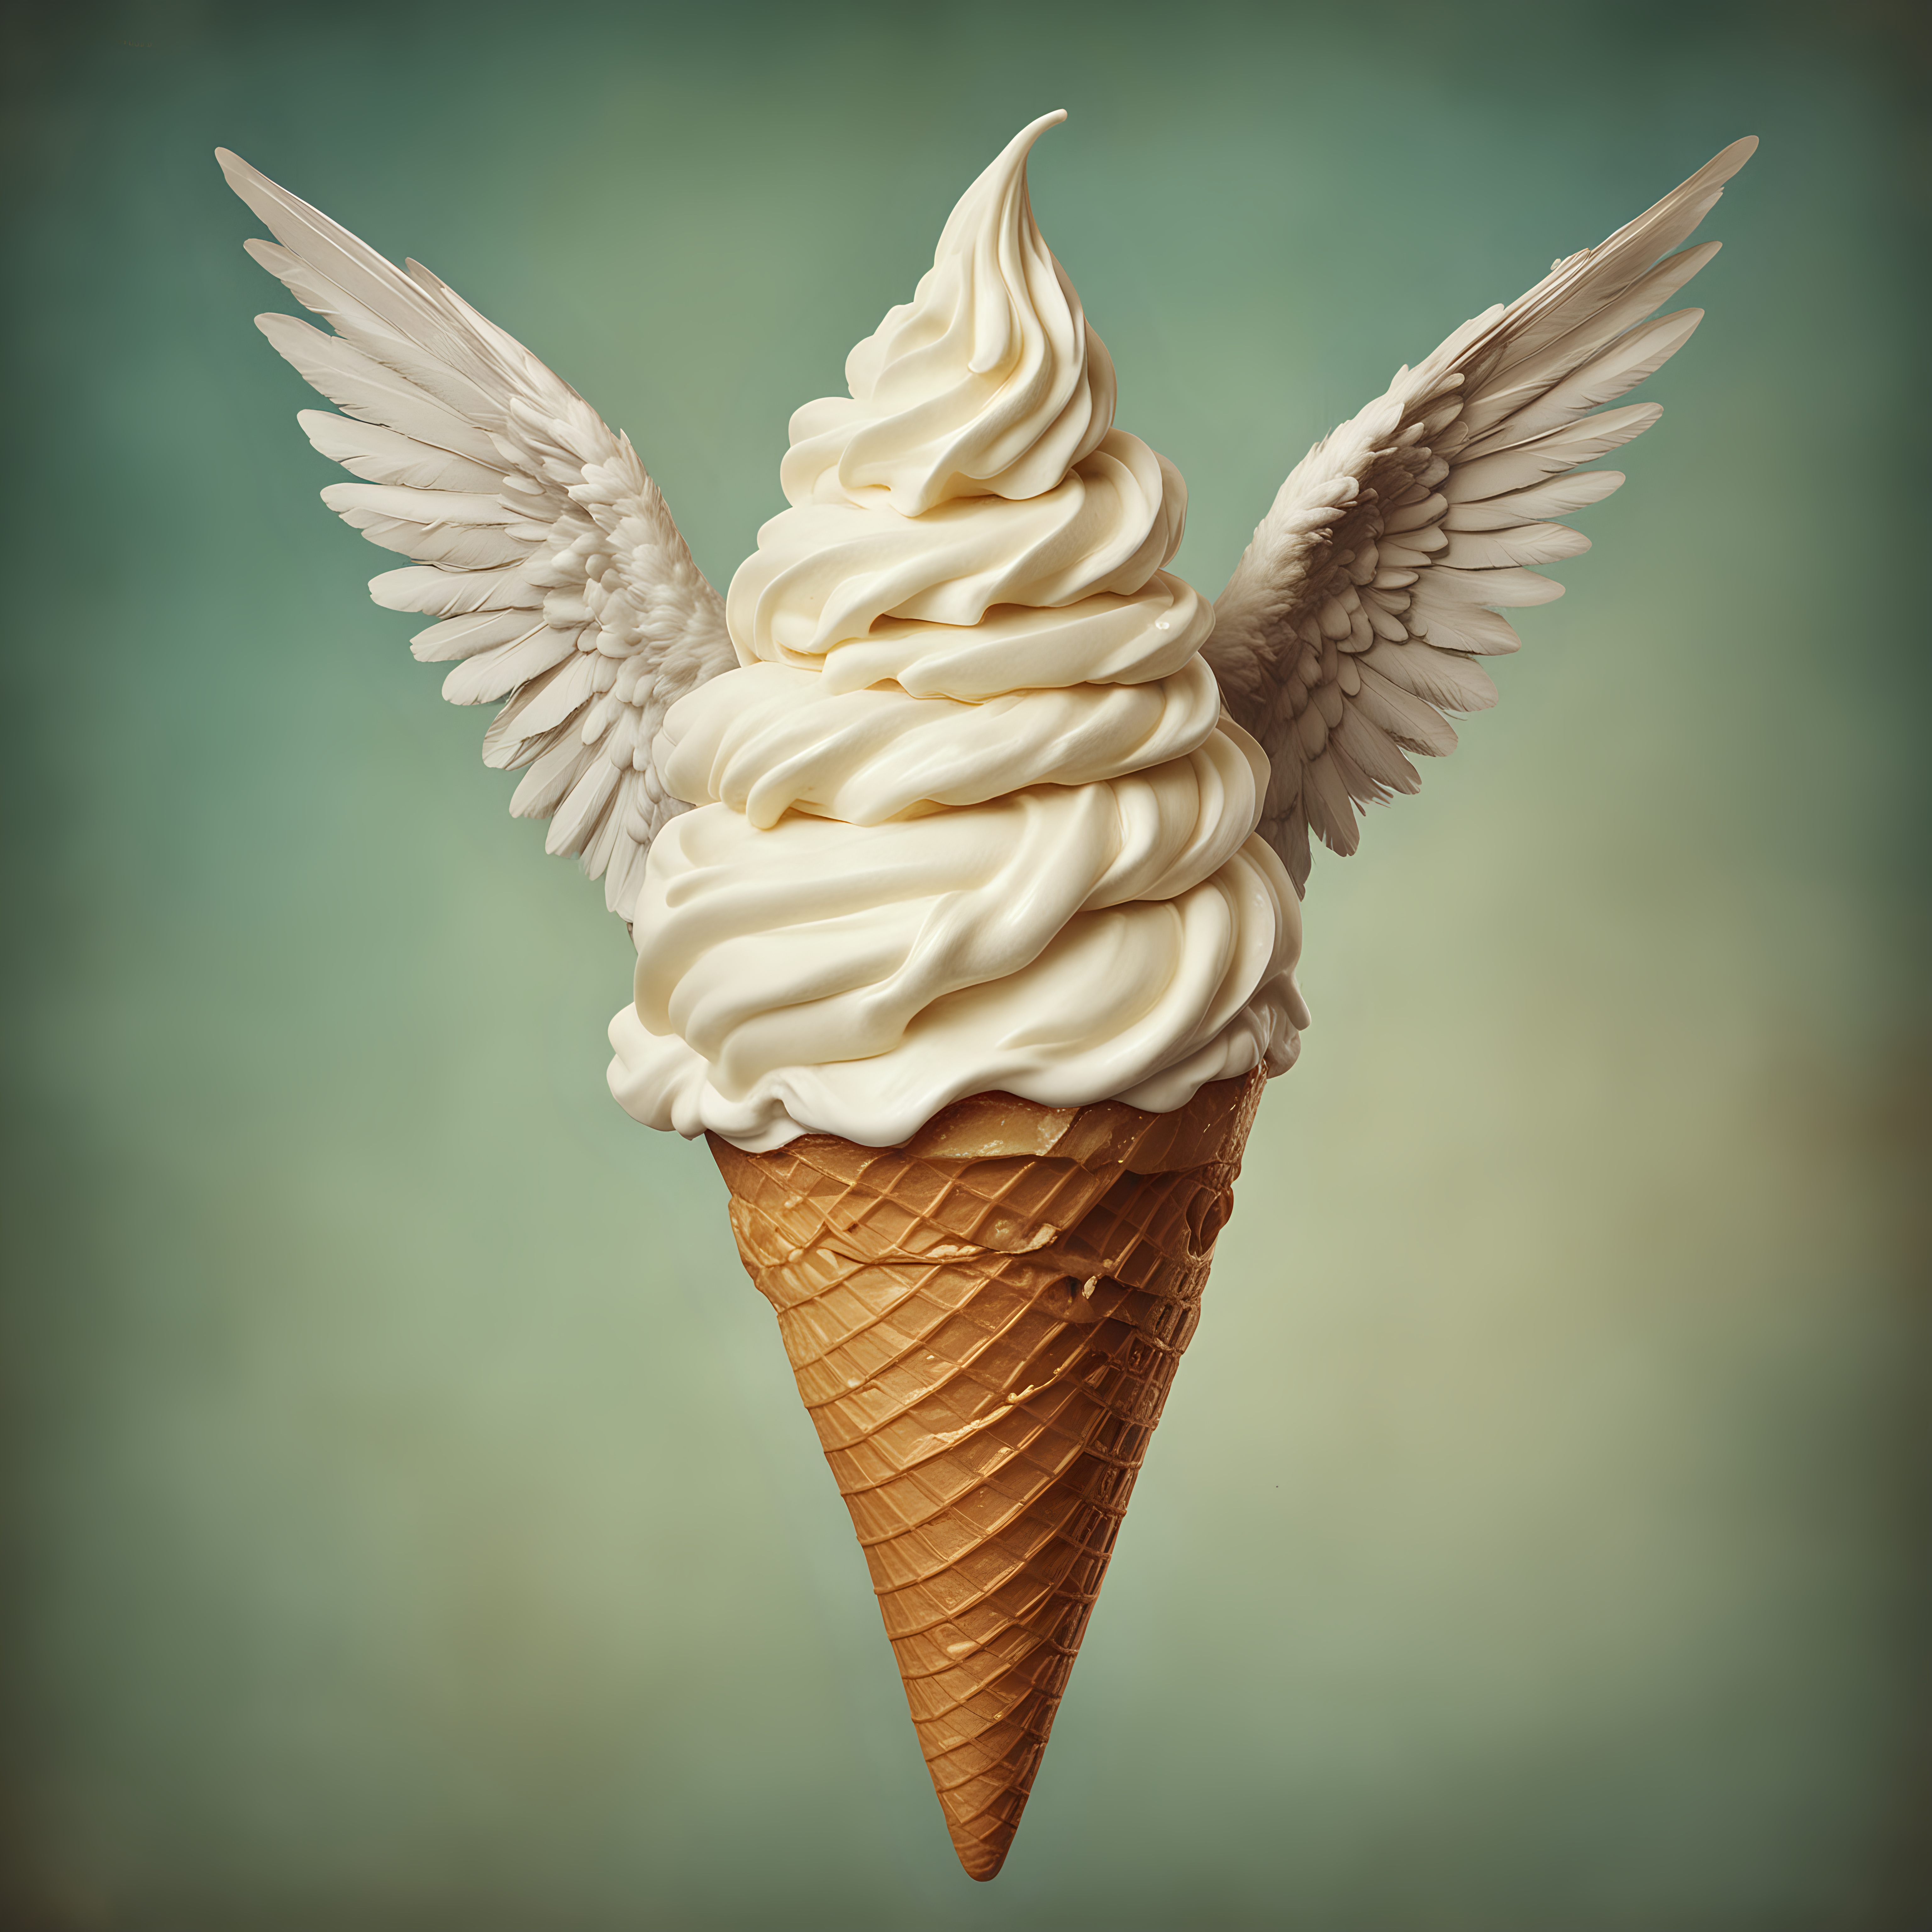 Whimsical Surrealism Giant Floating Soft Serve Ice Cream with Wings